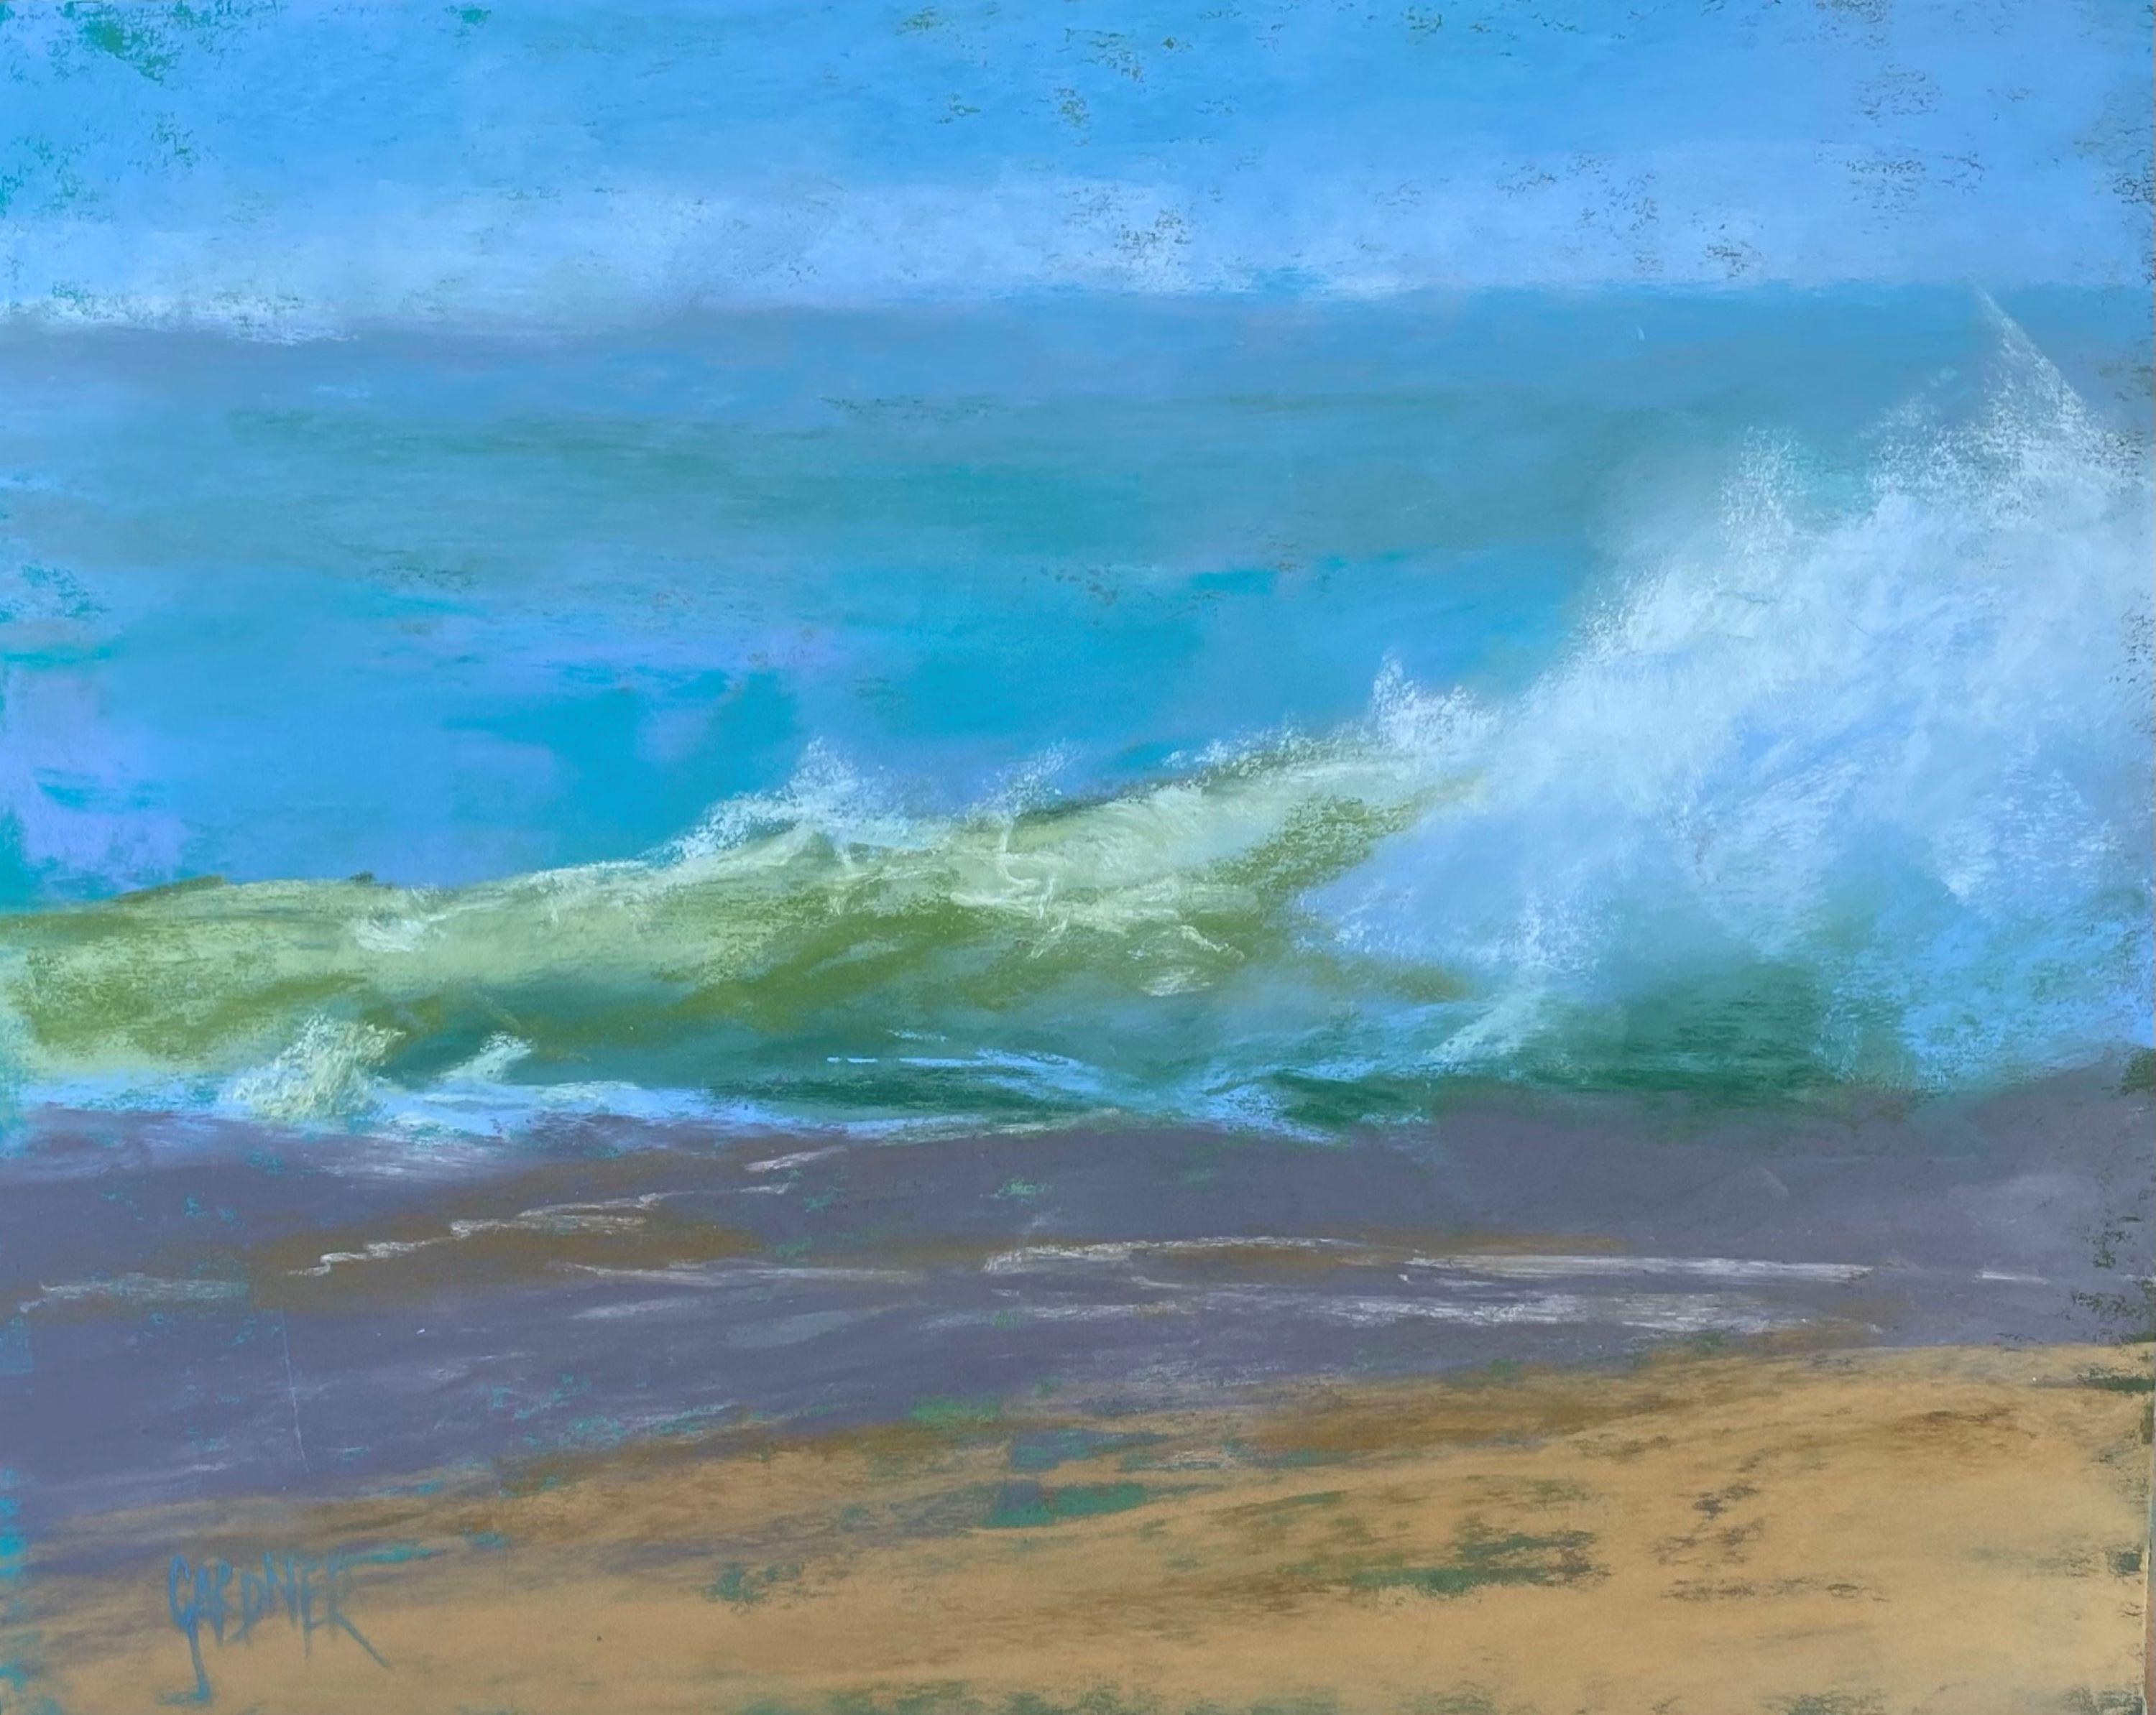 Dina Gardner Landscape Painting - Wave in Abstract, Original Impressionist Seascape Pastel Painting on Board, 2021